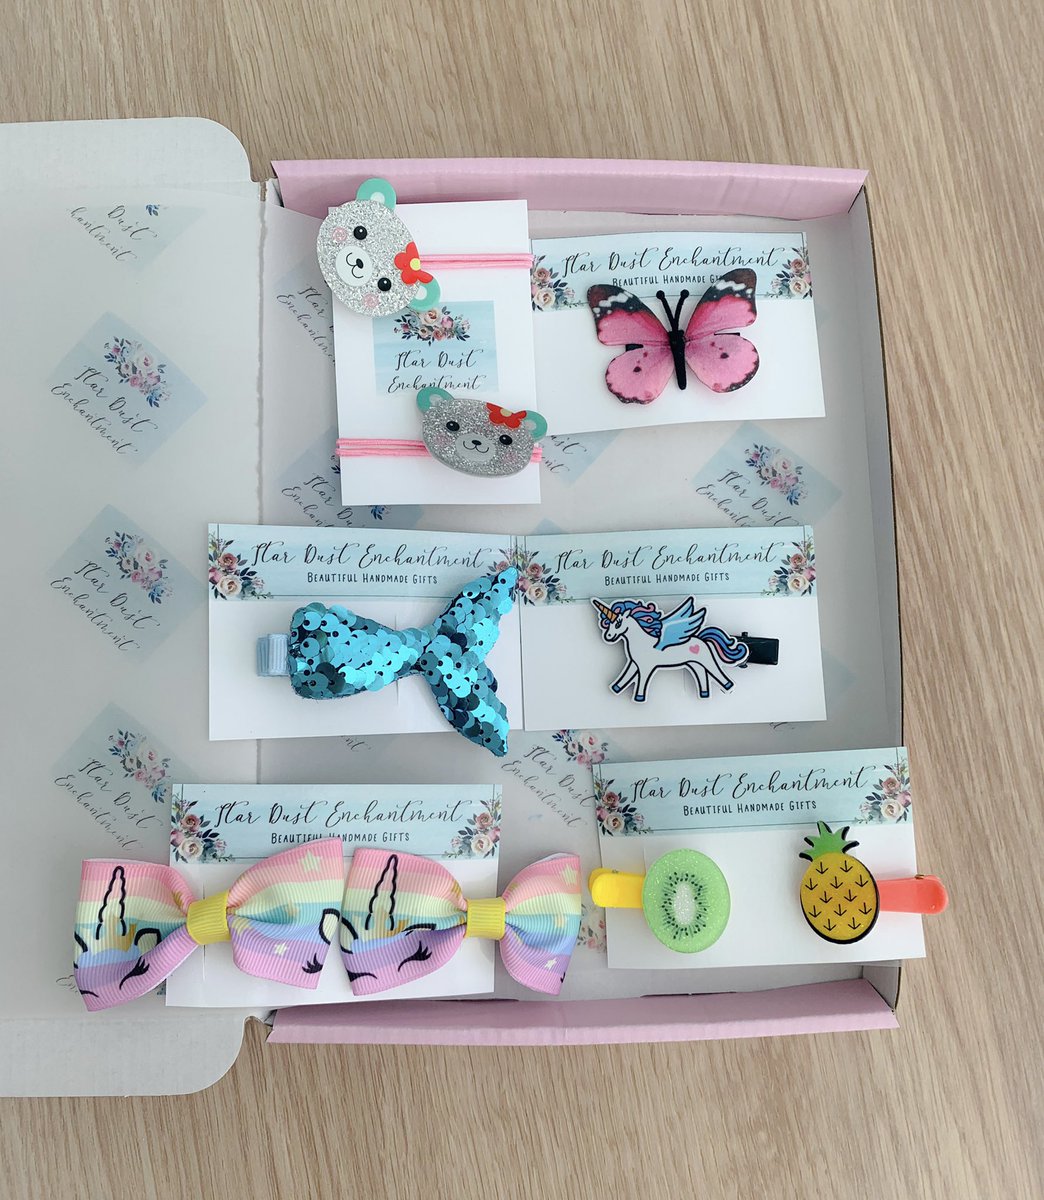 💕🌈🤩 Happy Monday everyone, here’s a new bow box I have added to my Etsy shop.  #Etsy #bowbox #happymail #kidsgiftideas #hairbows #kidshair #hair #presents